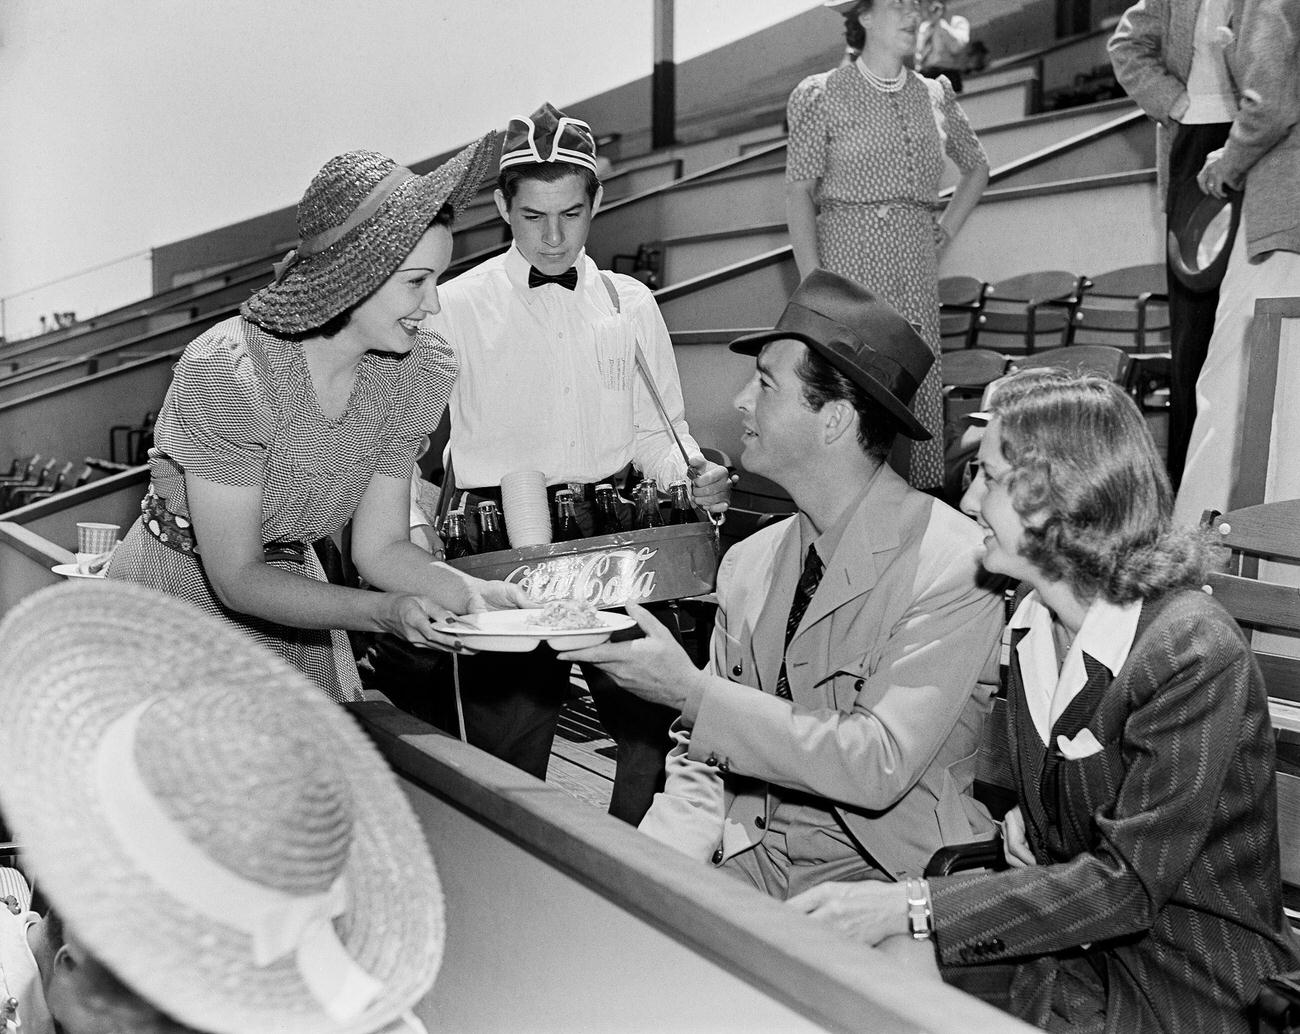 Actors Robert Taylor and Barbara Stanwyck offered food and Coca-Cola at a game in Los Angeles, circa 1940.